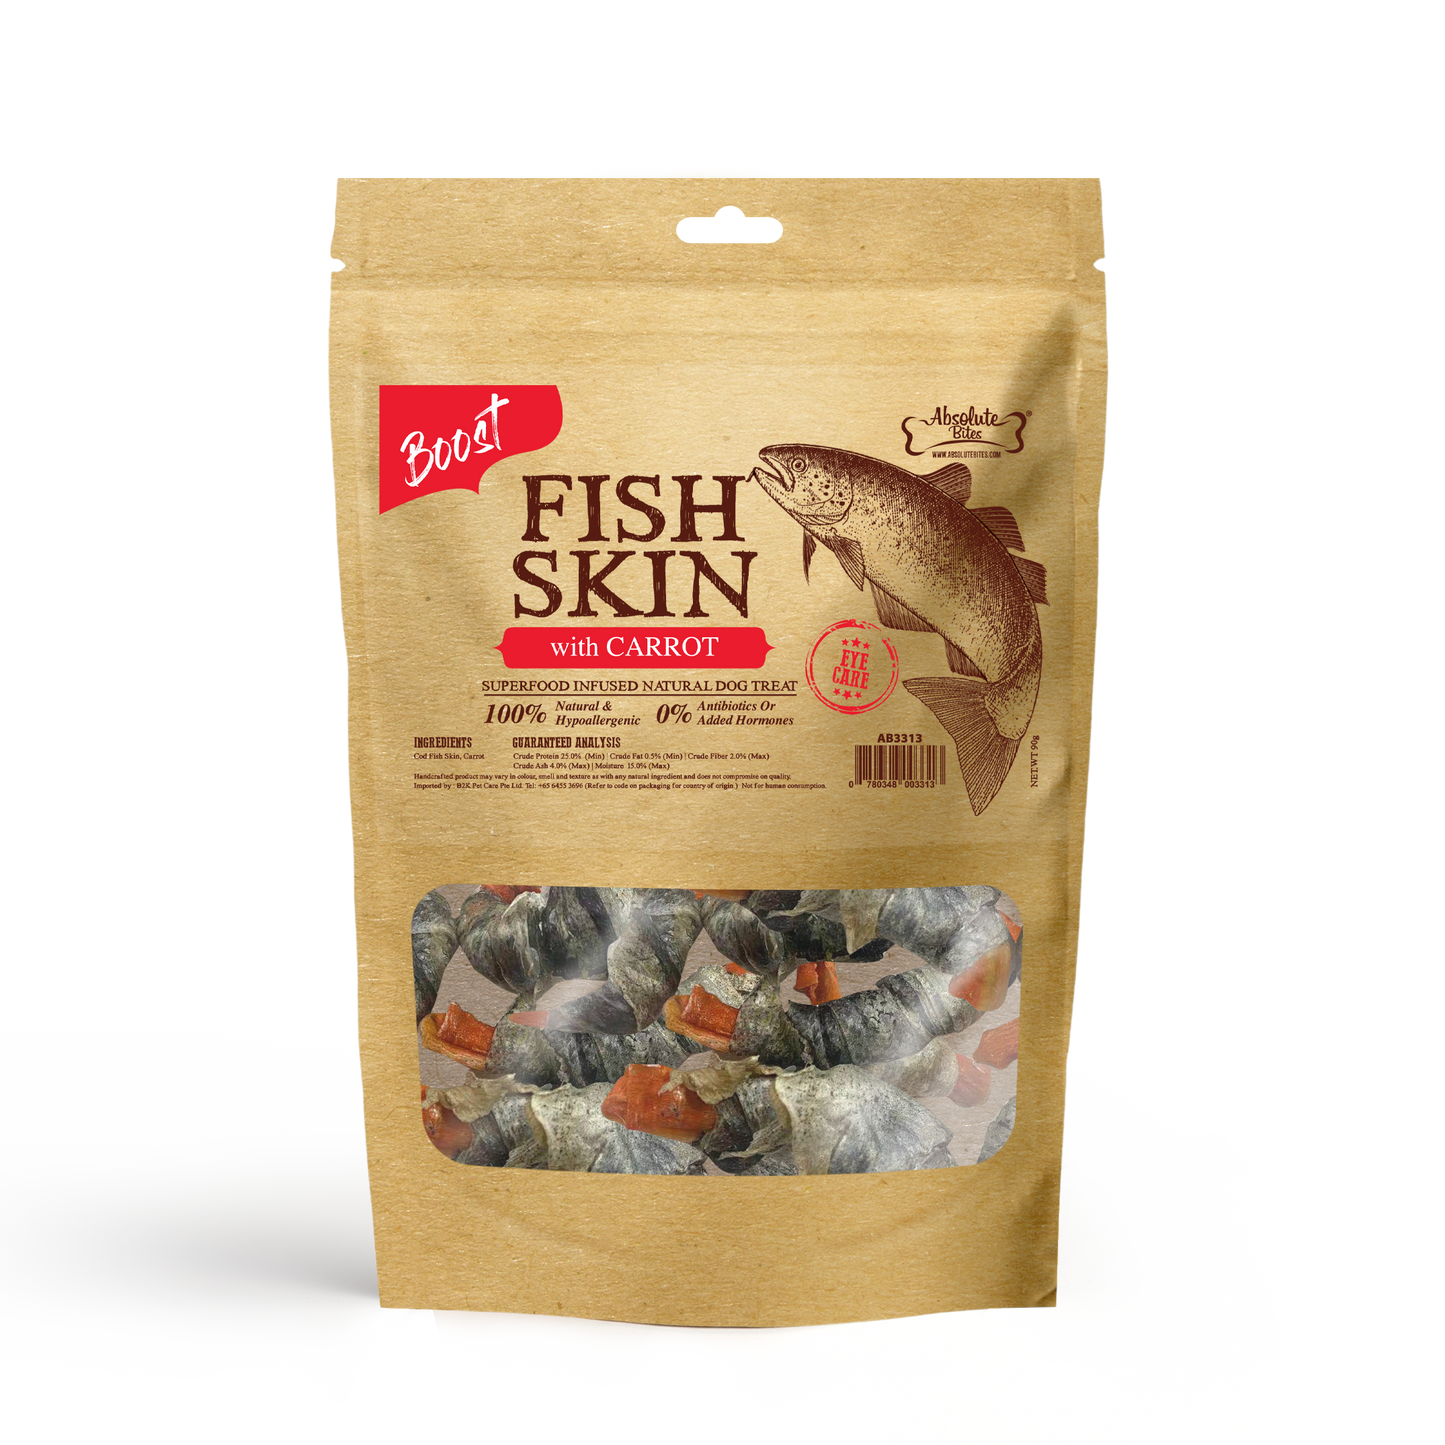 Absolute Bites Air Dried Cod Fish Skin with Carrot Dog Treats (Small Bag) 90g